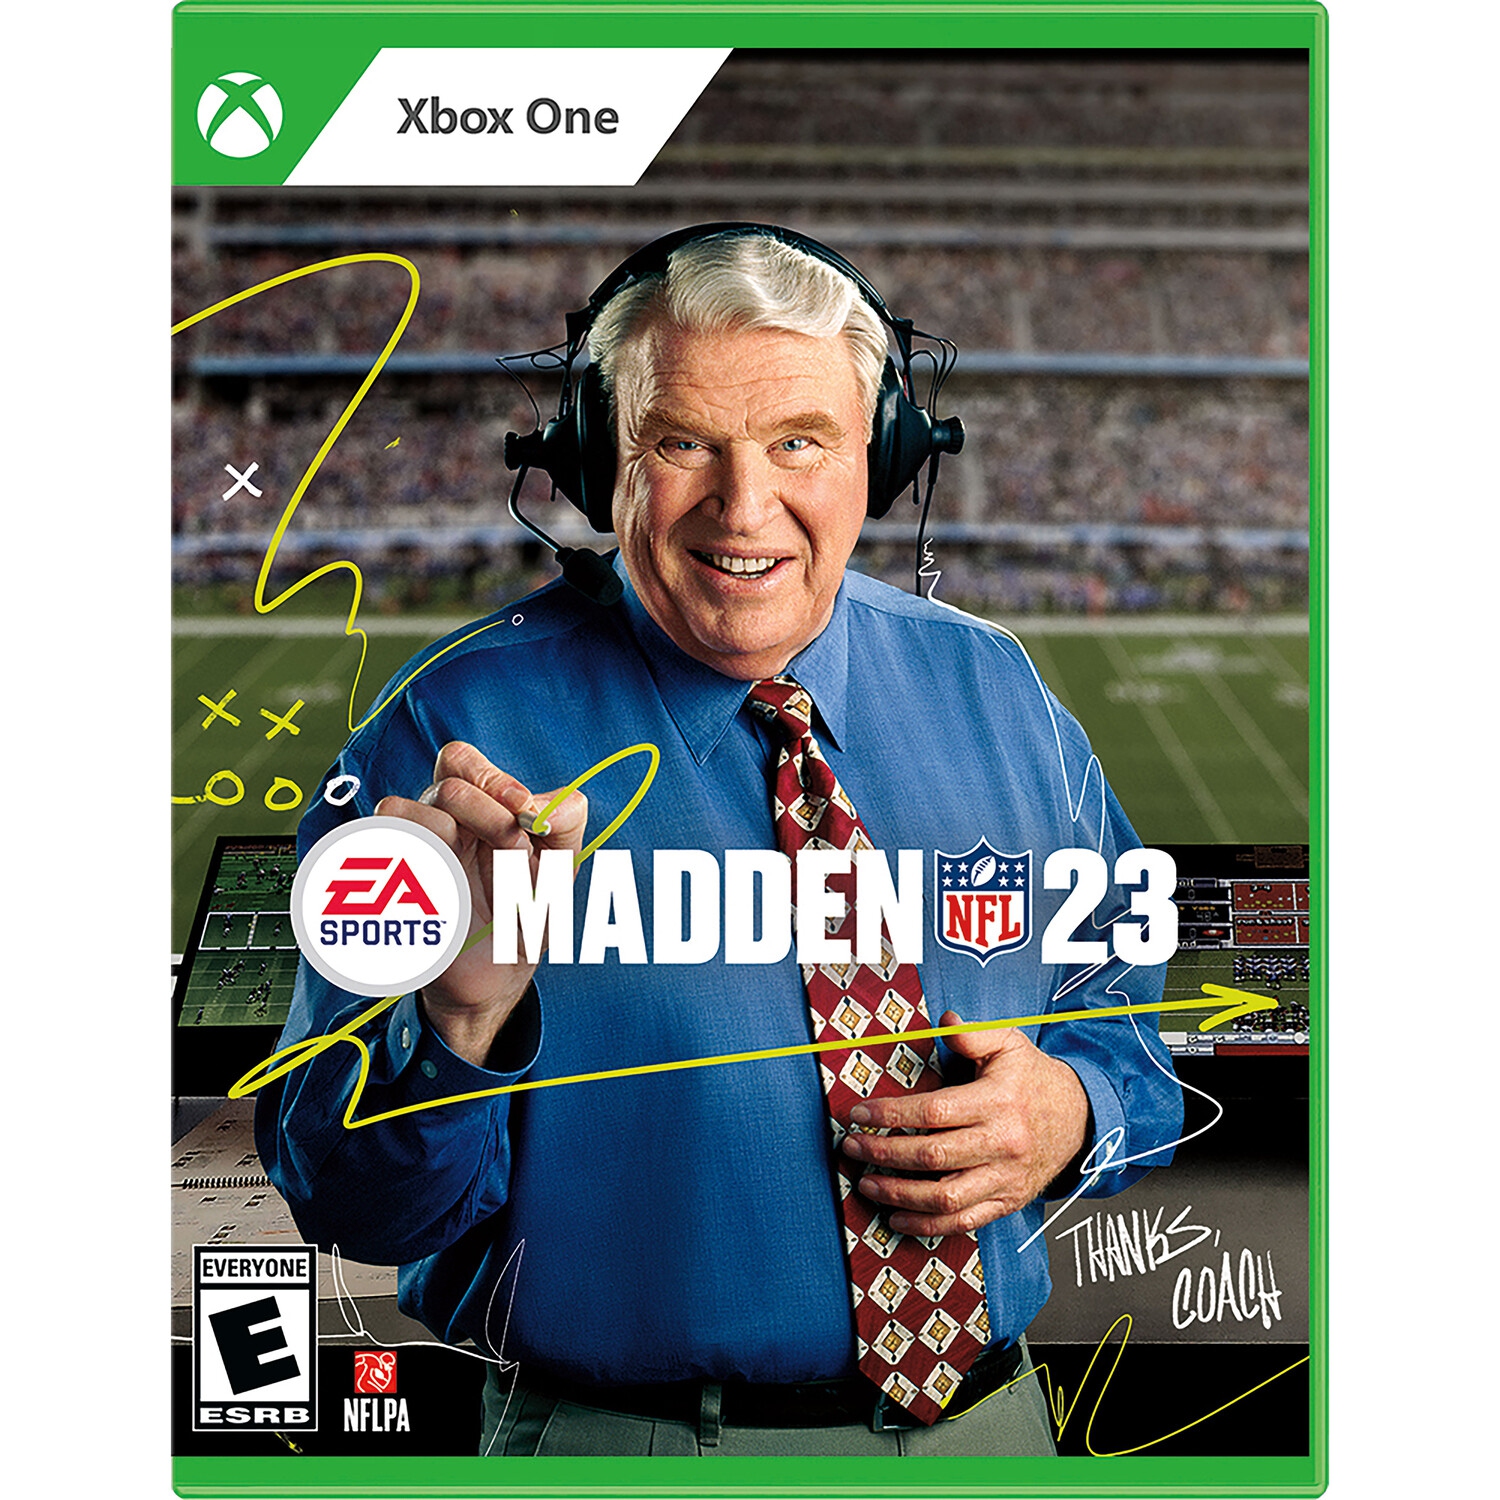 MADDEN NFL 23 for Xbox One [VIDEOGAMES]